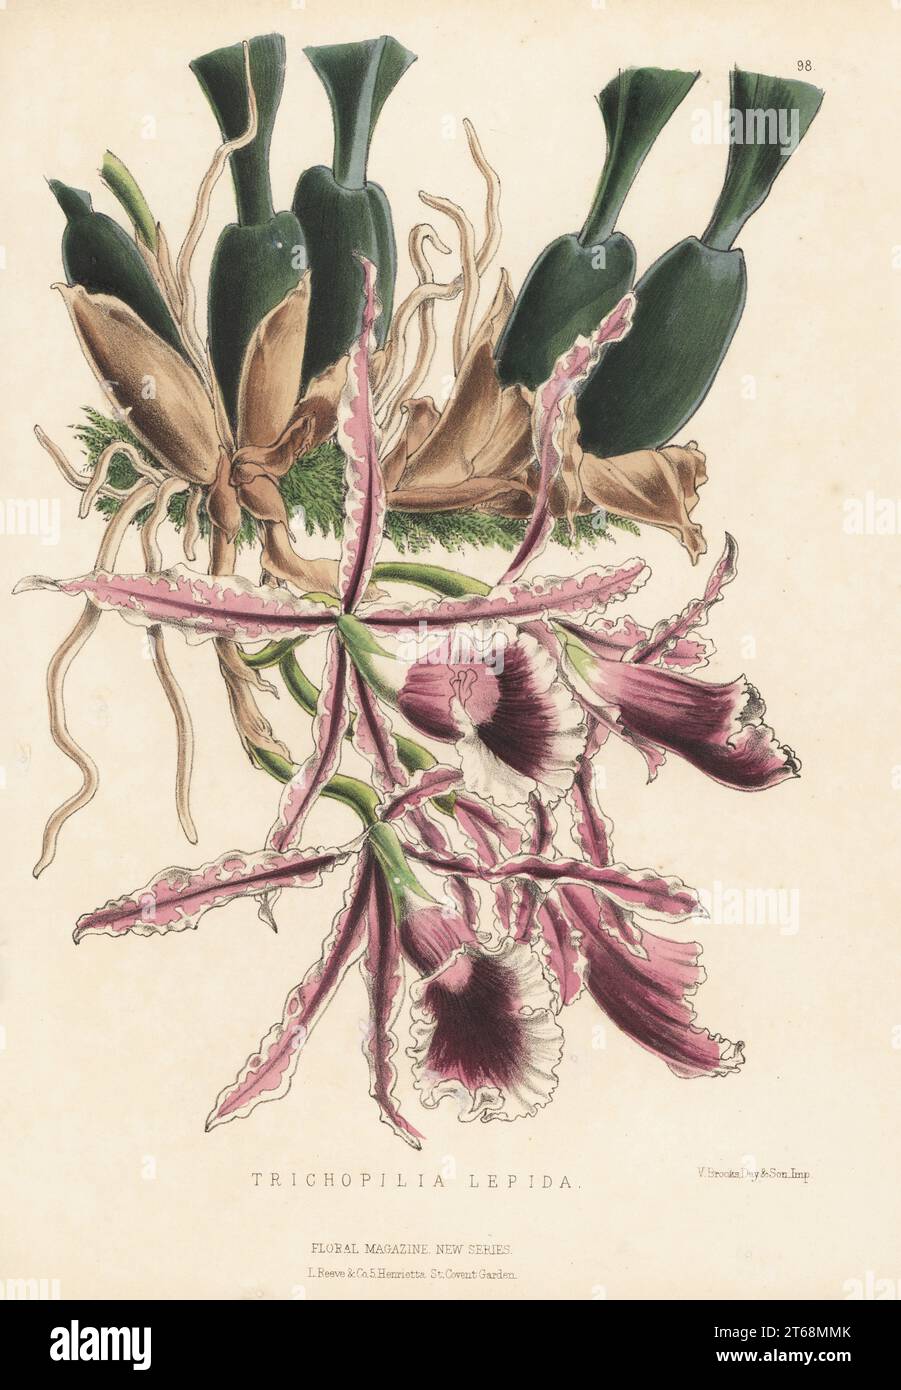 Trichopilia marginata orchid, native to Guatemala, Honduras, Nicaragua, Costa Rica and Panama. Imported by Veitch and Sons nursery. As Trichopilia lepida. Handcolored botanical illustration drawn and lithographed by Worthington George Smith from Henry Honywood Dombrain's Floral Magazine, New Series, Volume 3, L. Reeve, London, 1874. Lithograph printed by Vincent Brooks, Day & Son. Stock Photo